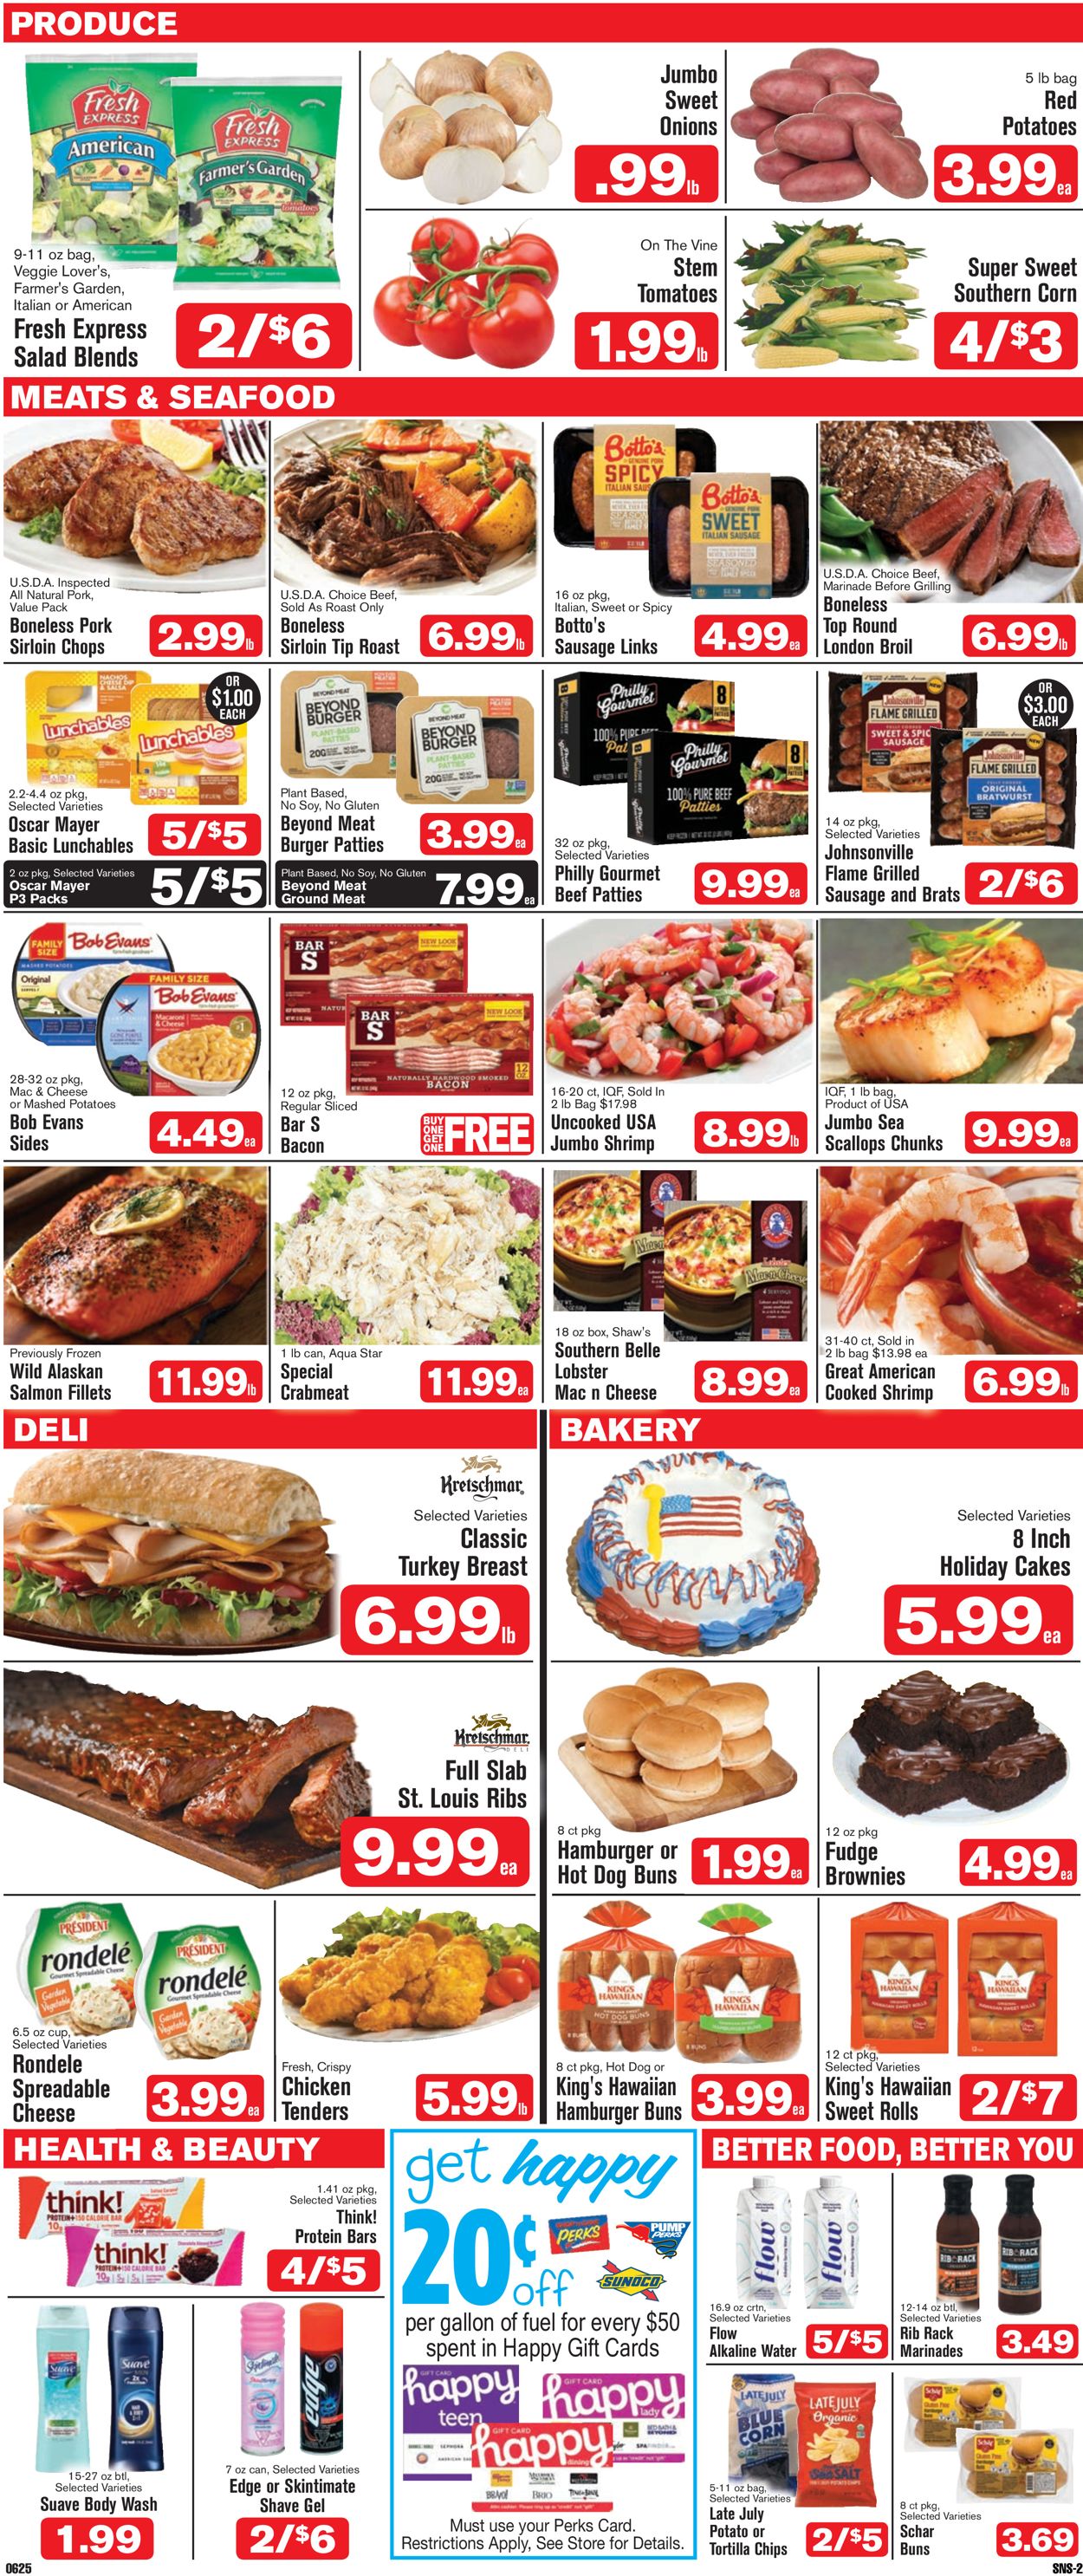 Catalogue Shop ‘n Save from 06/25/2020